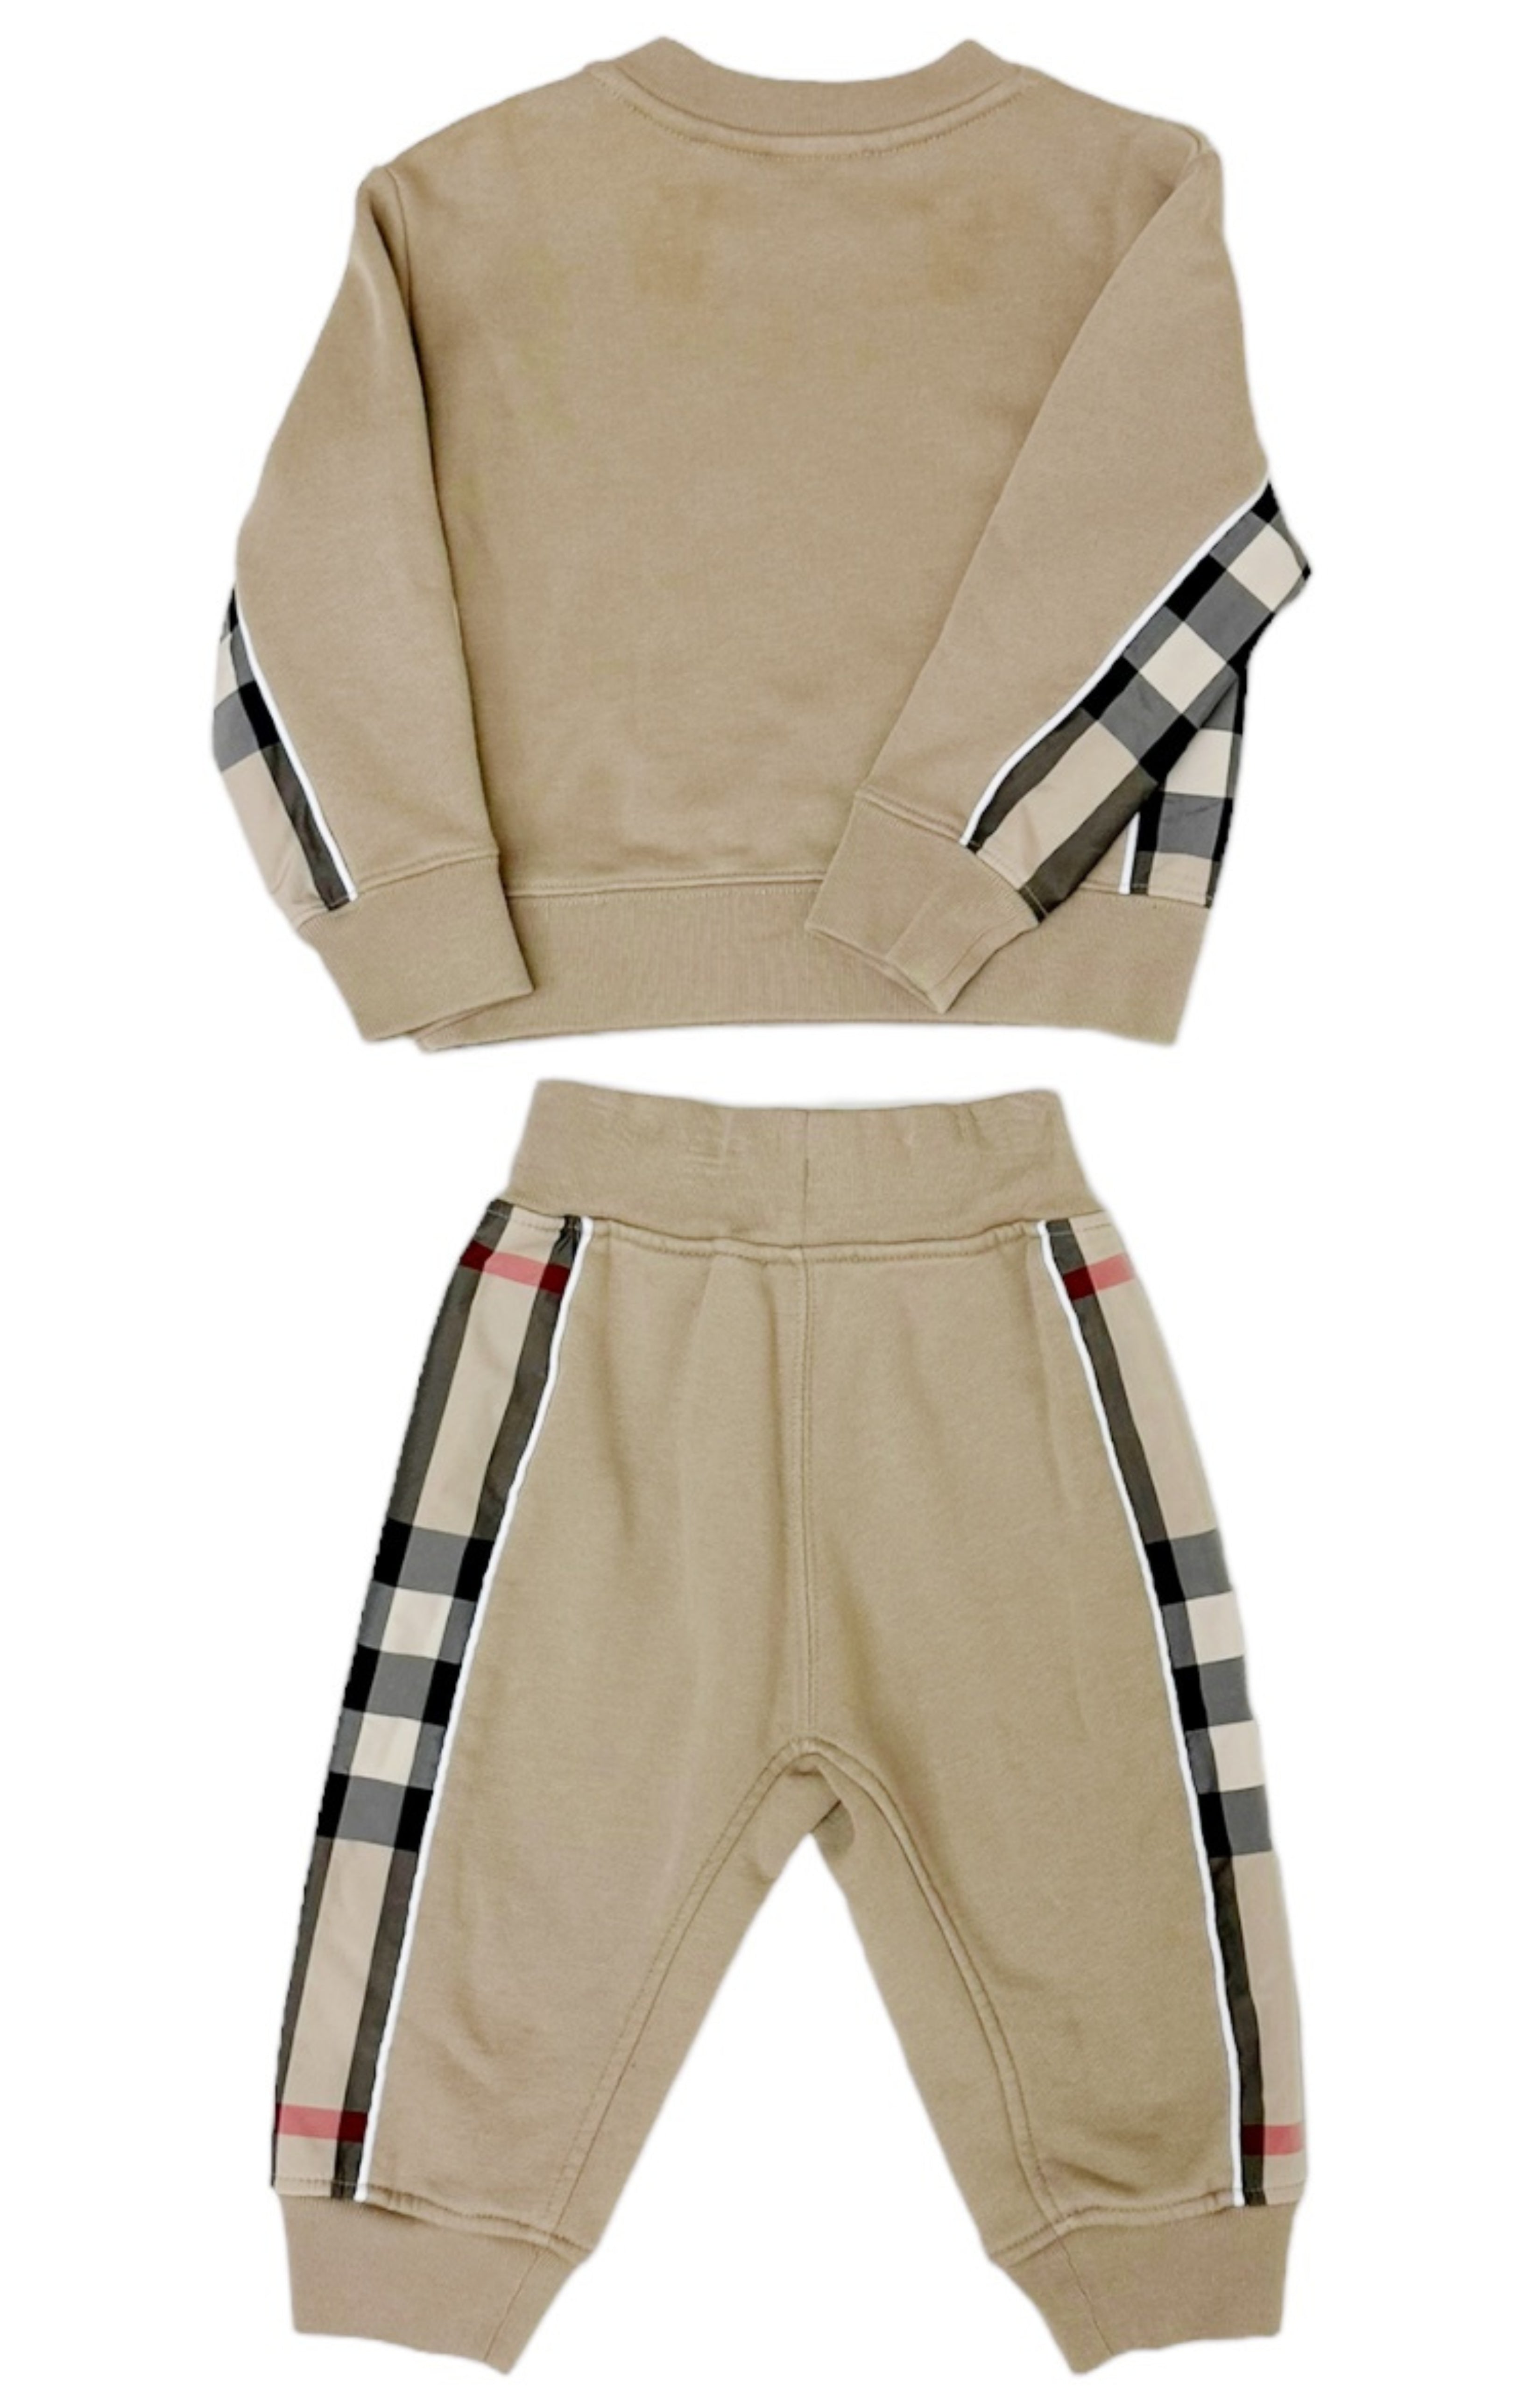 BURBERRY Sweatsuit Size: 12 Months